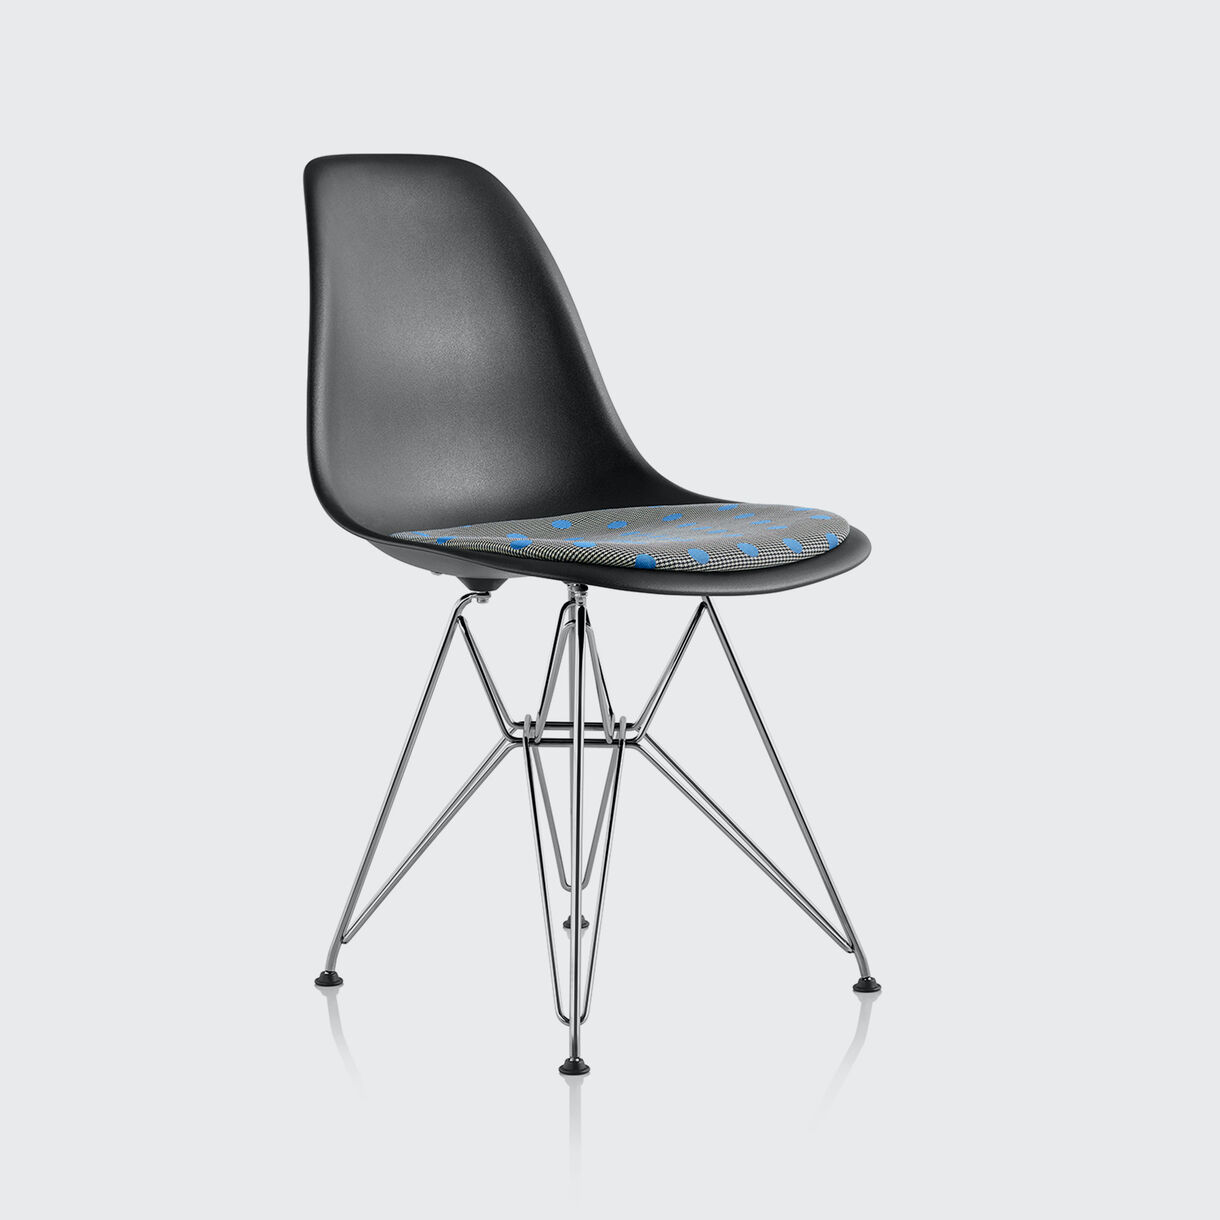 Eames Moulded Plastic Side Chair, Paul Smith x Maharam